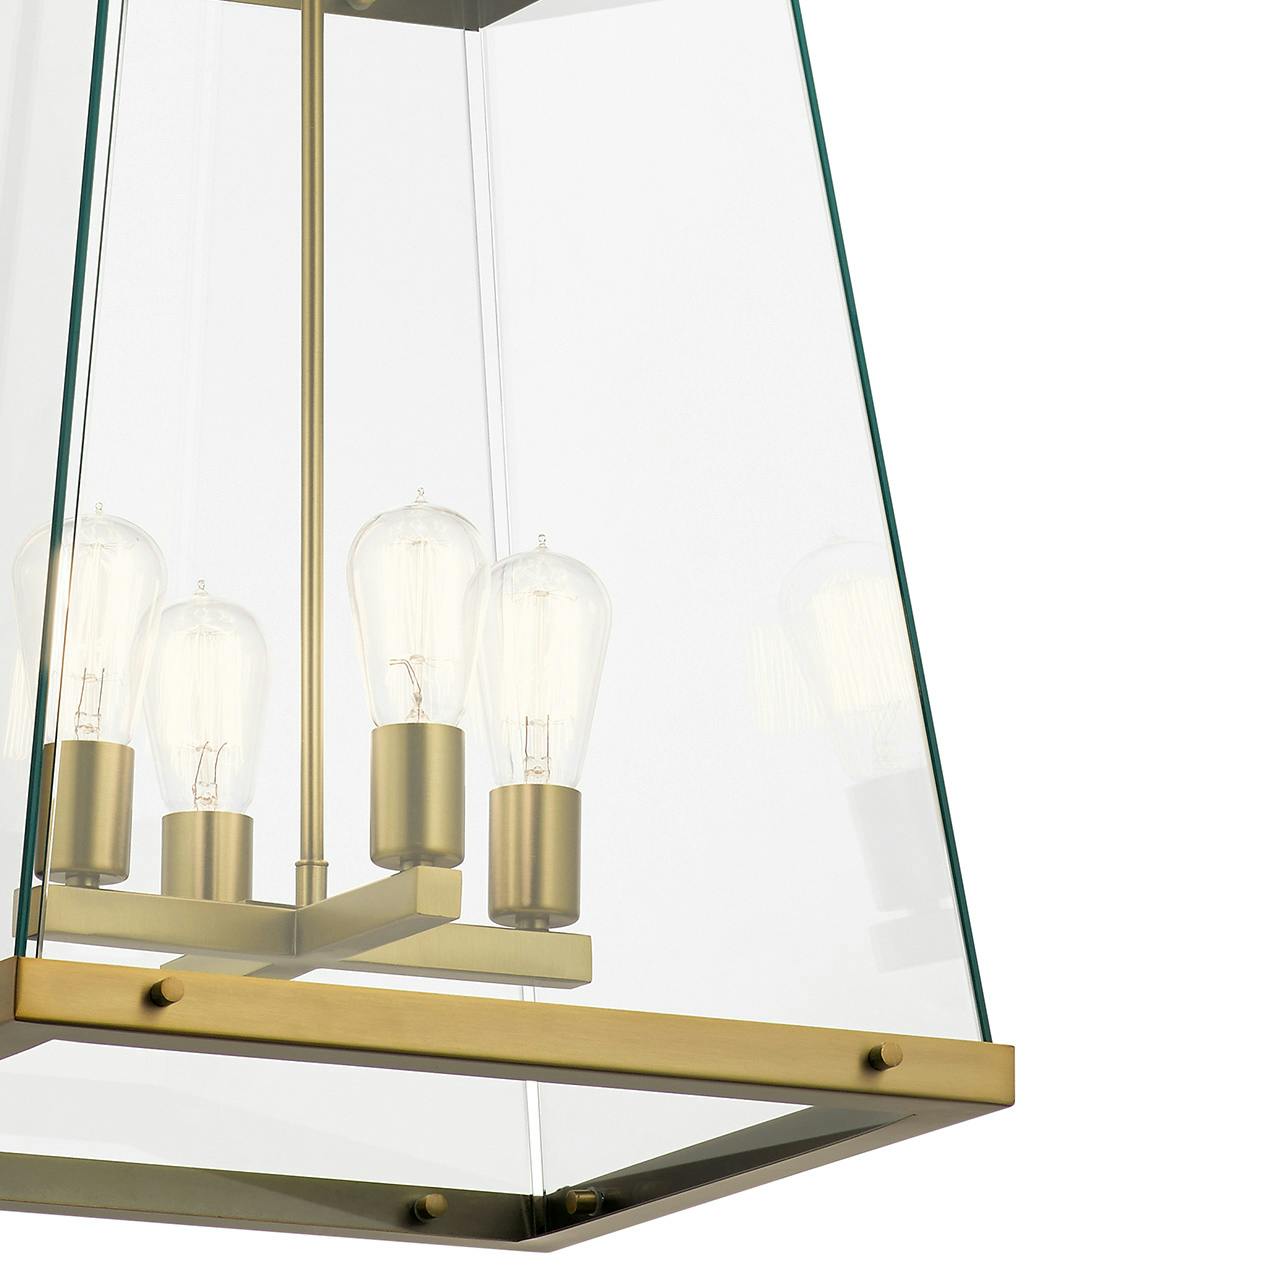 Close up view of the Darton 25.75" 4 Light Large Pendant Brass on a white background